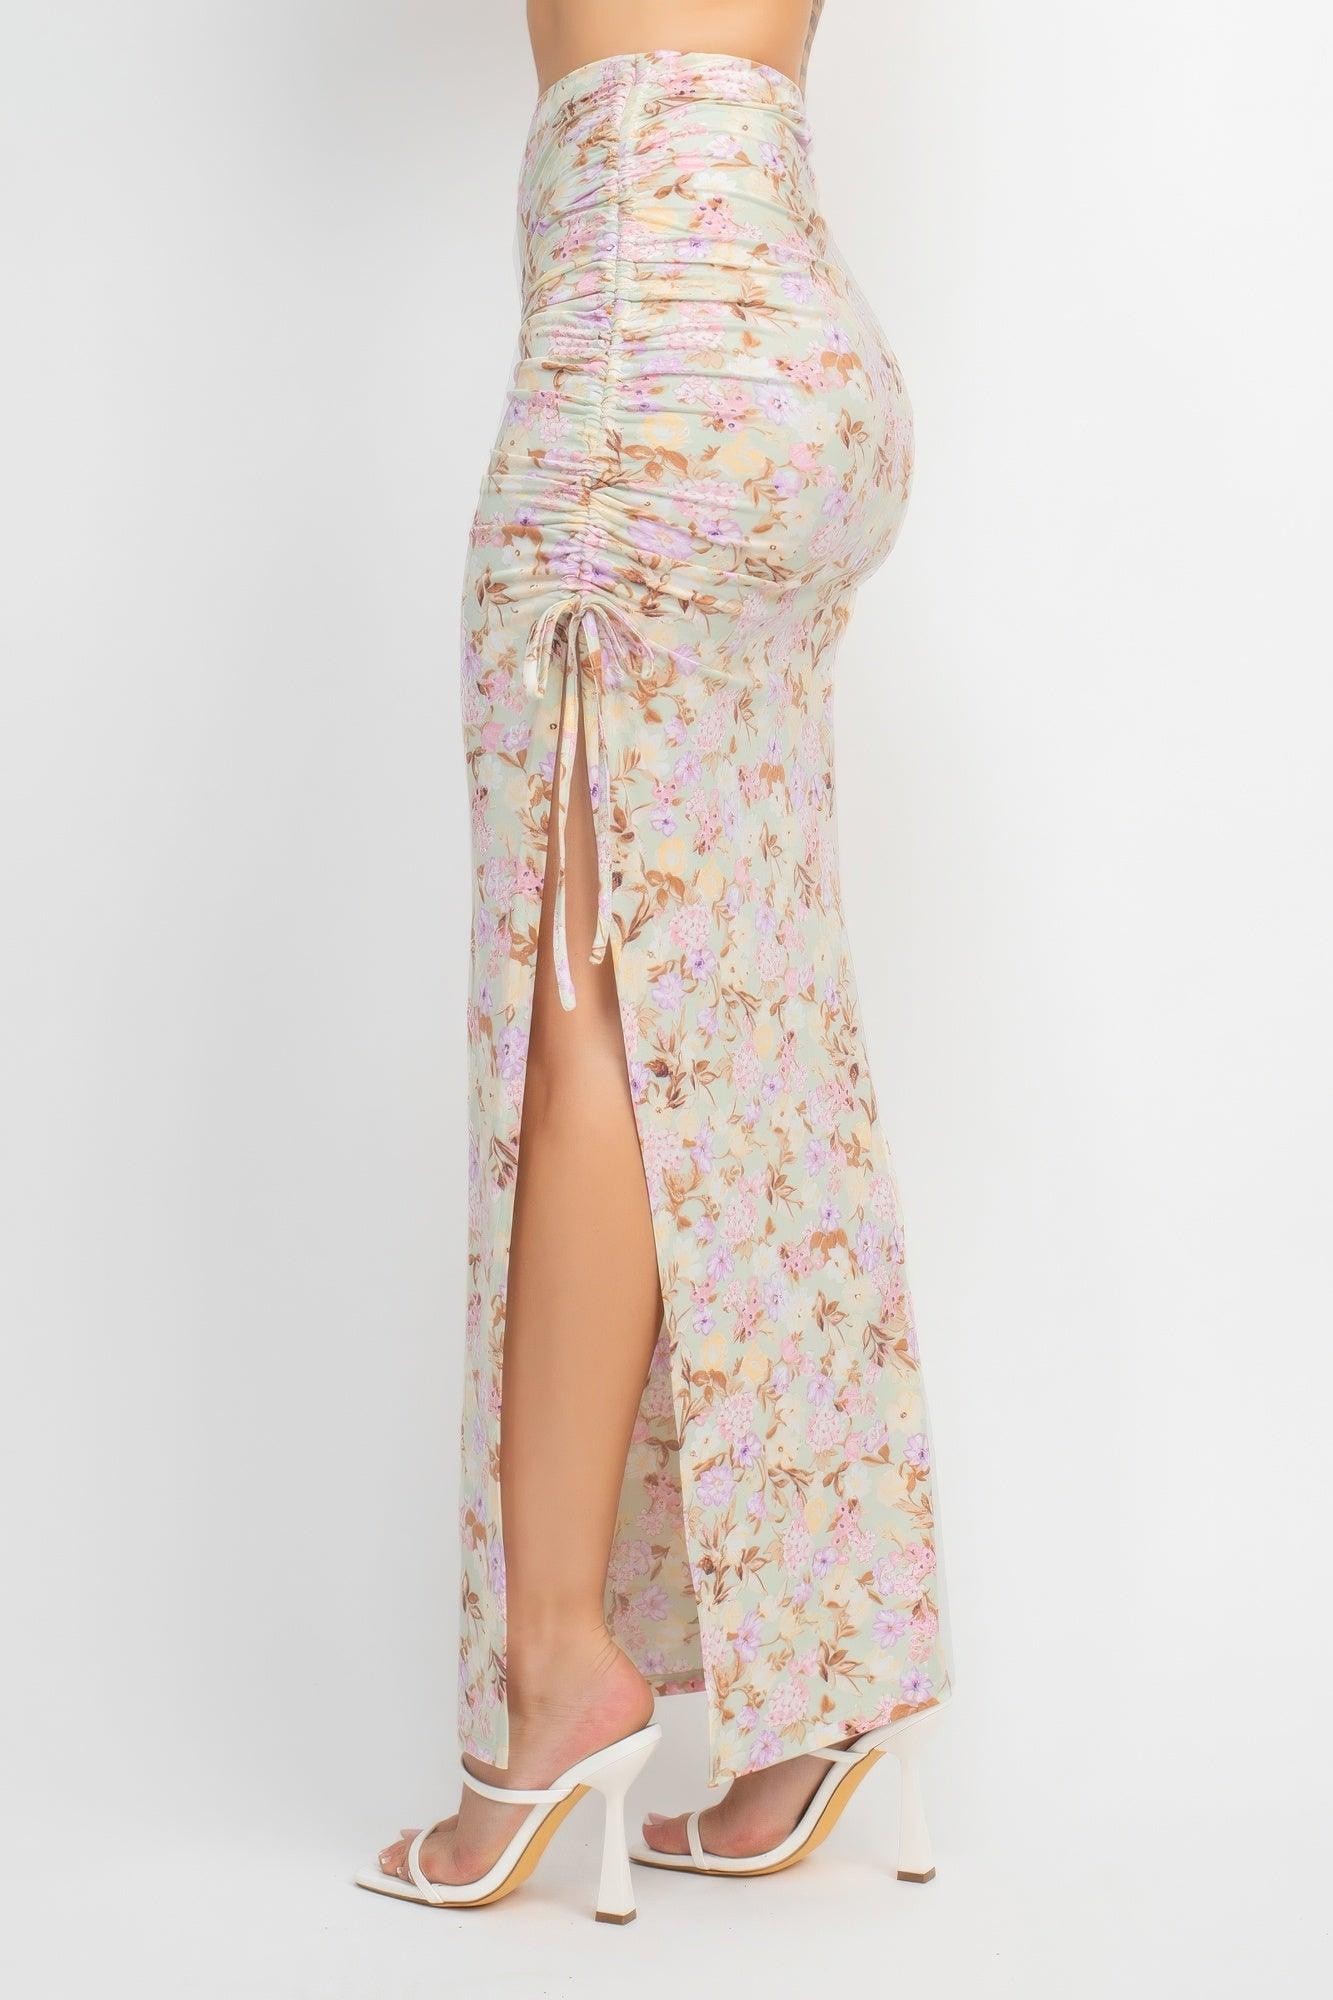 Front Knot Floral Top & Ruched Maxi Skirts Set - AMIClubwear